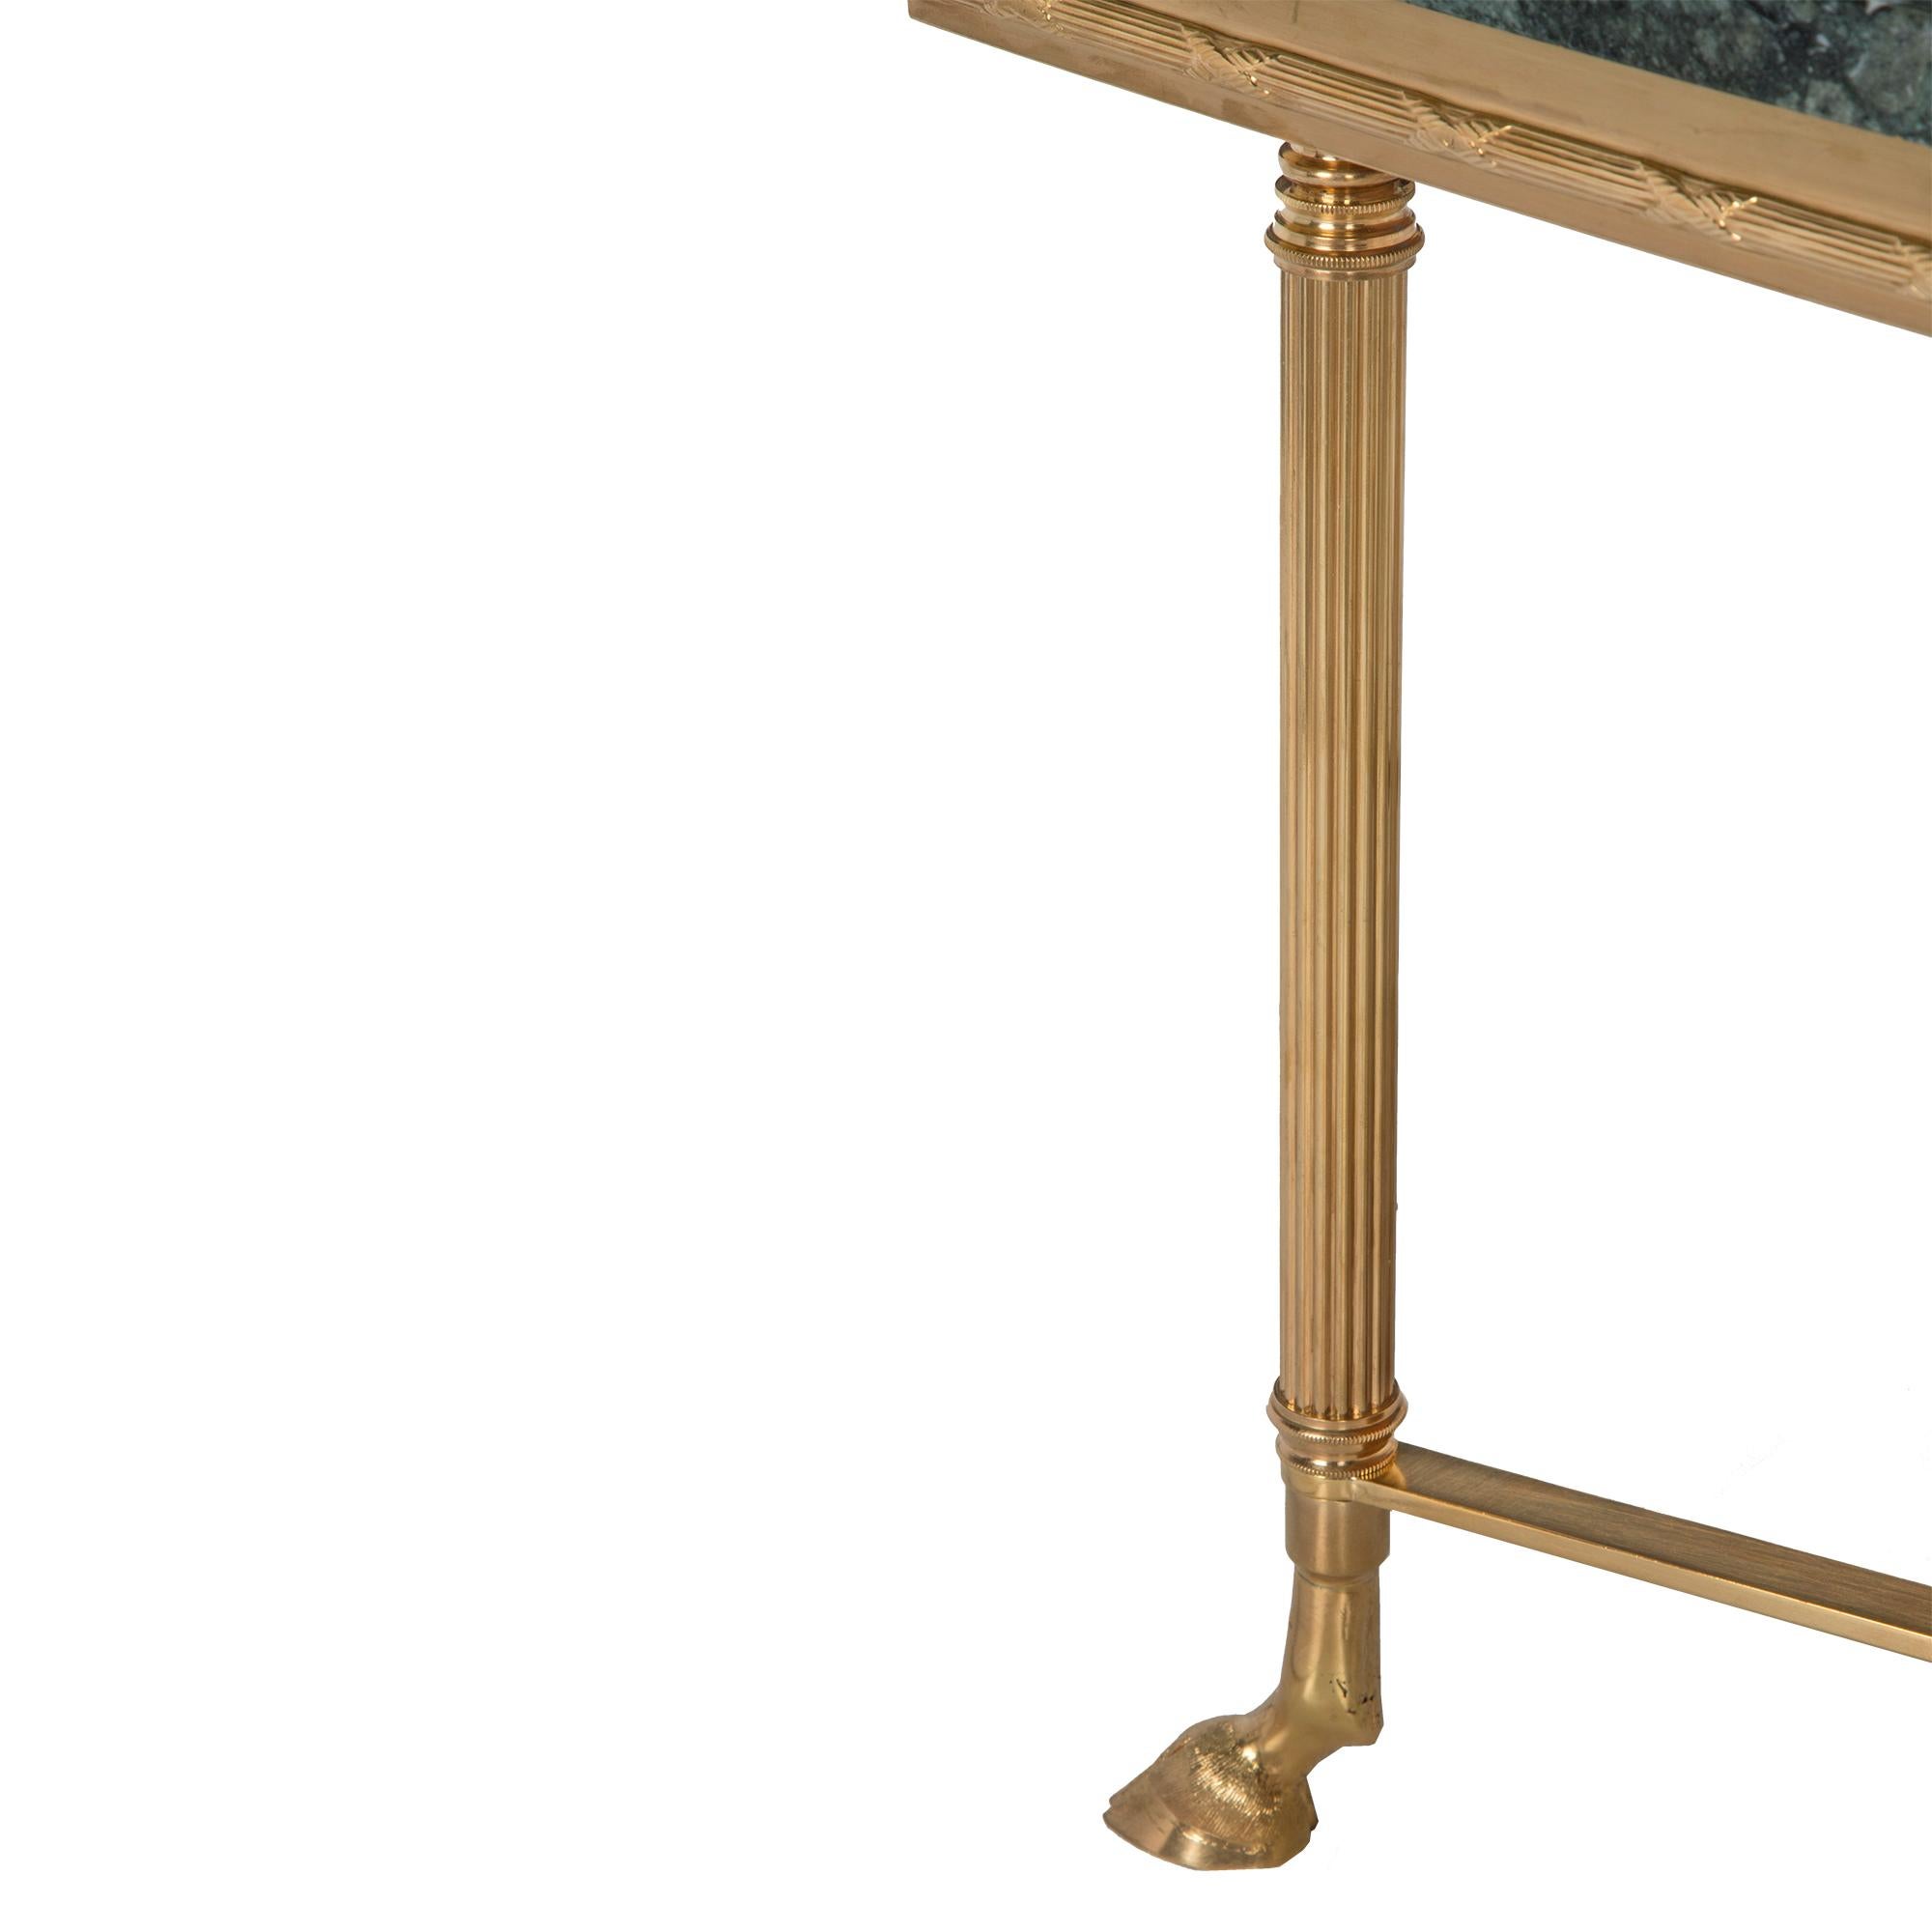 French Turn of the Century Louis XVI Style Ormolu and Marble Coffee Table 1